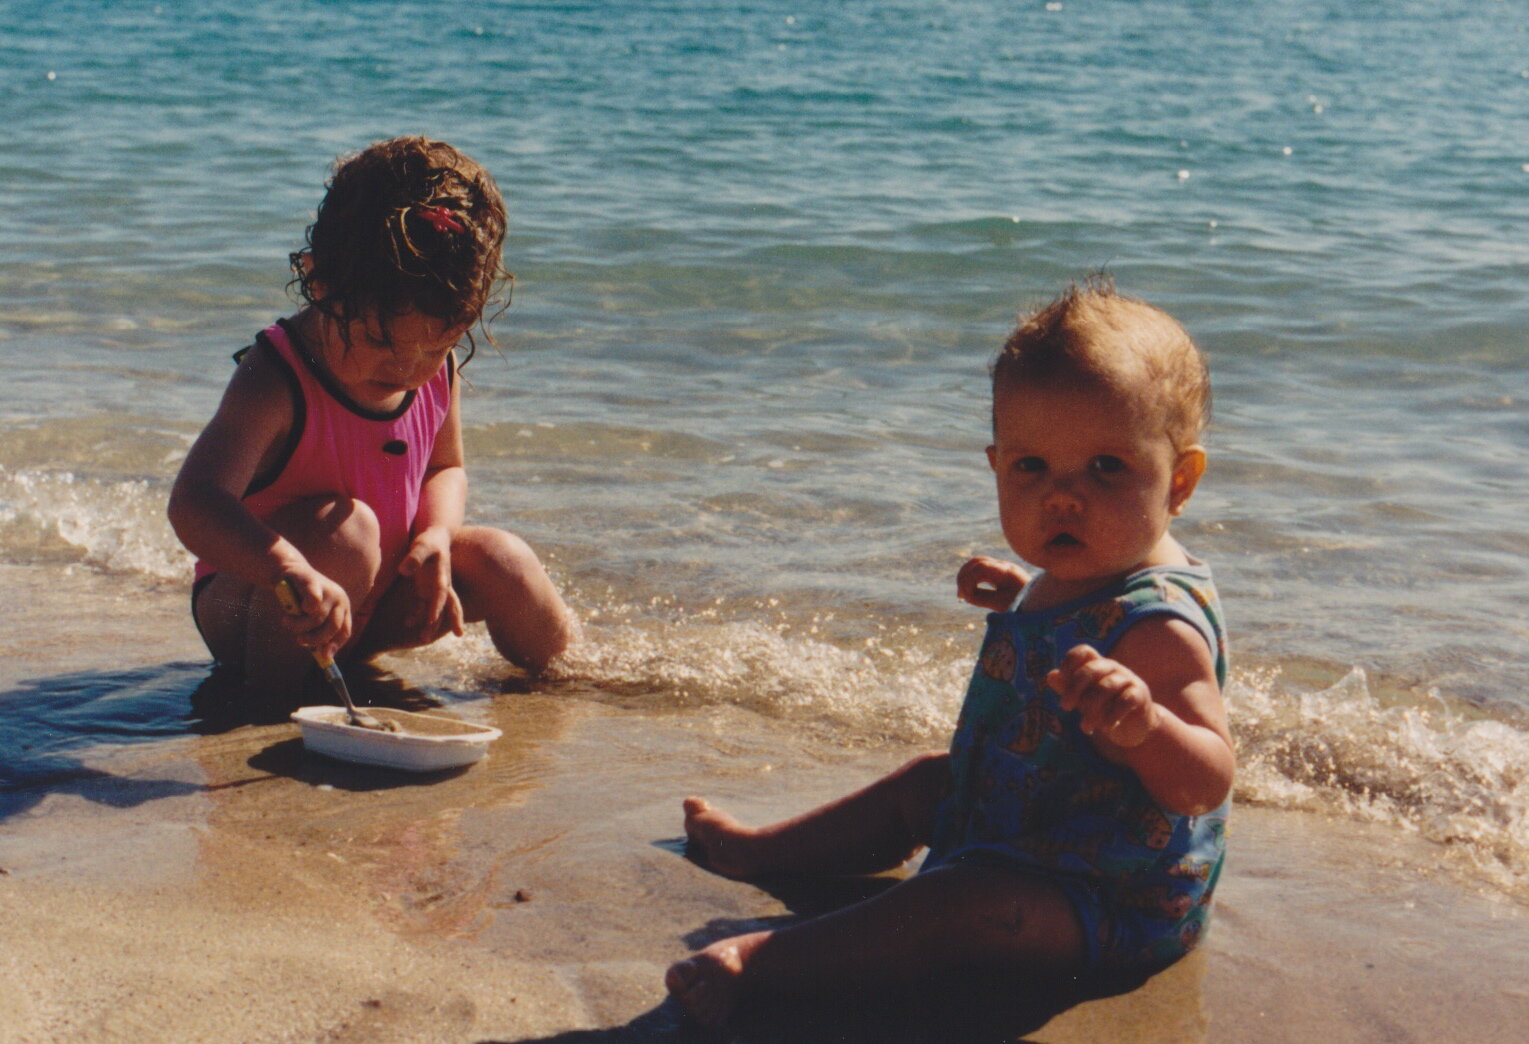  My sister and me at the beach in Mexico as children 